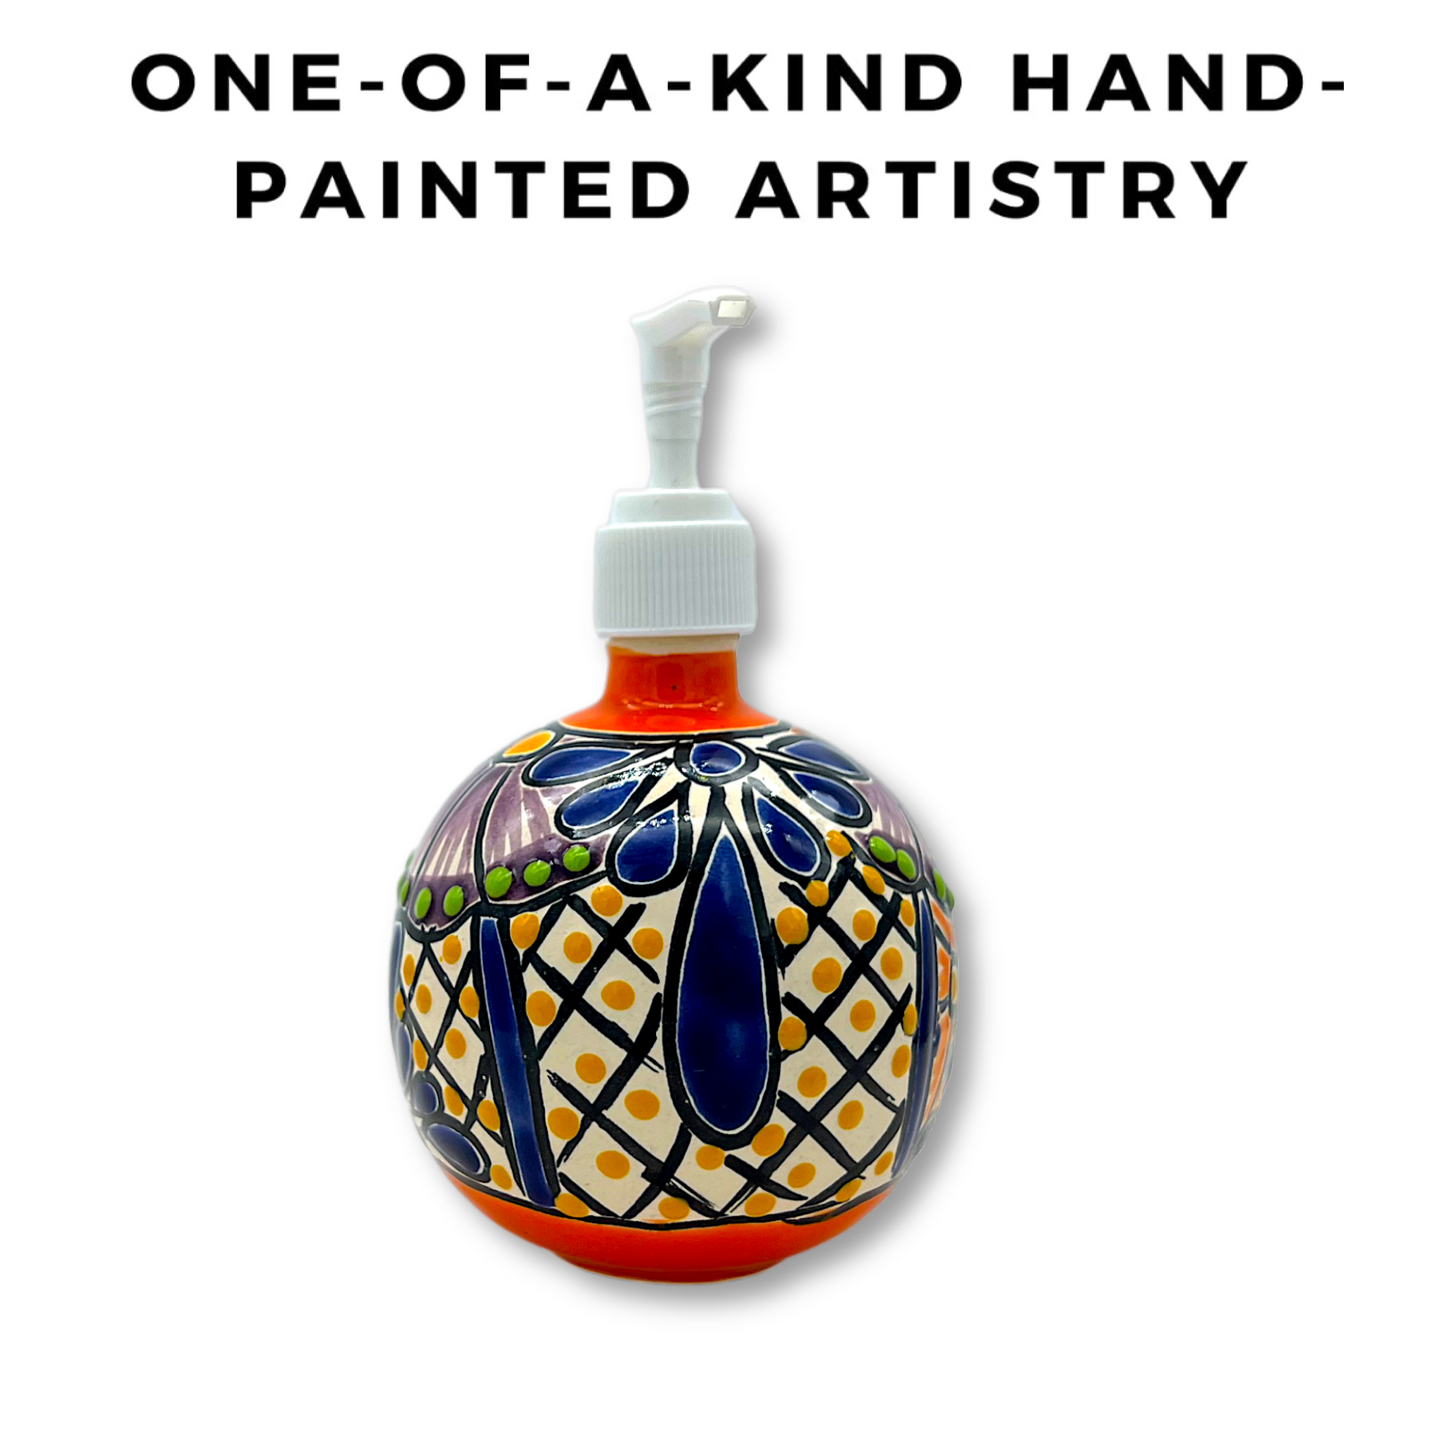 one of a kind Hand-painted Talavera Ceramic Soap Dispenser in vibrant colors, an artistic addition to kitchen or bathroom. sphered shape